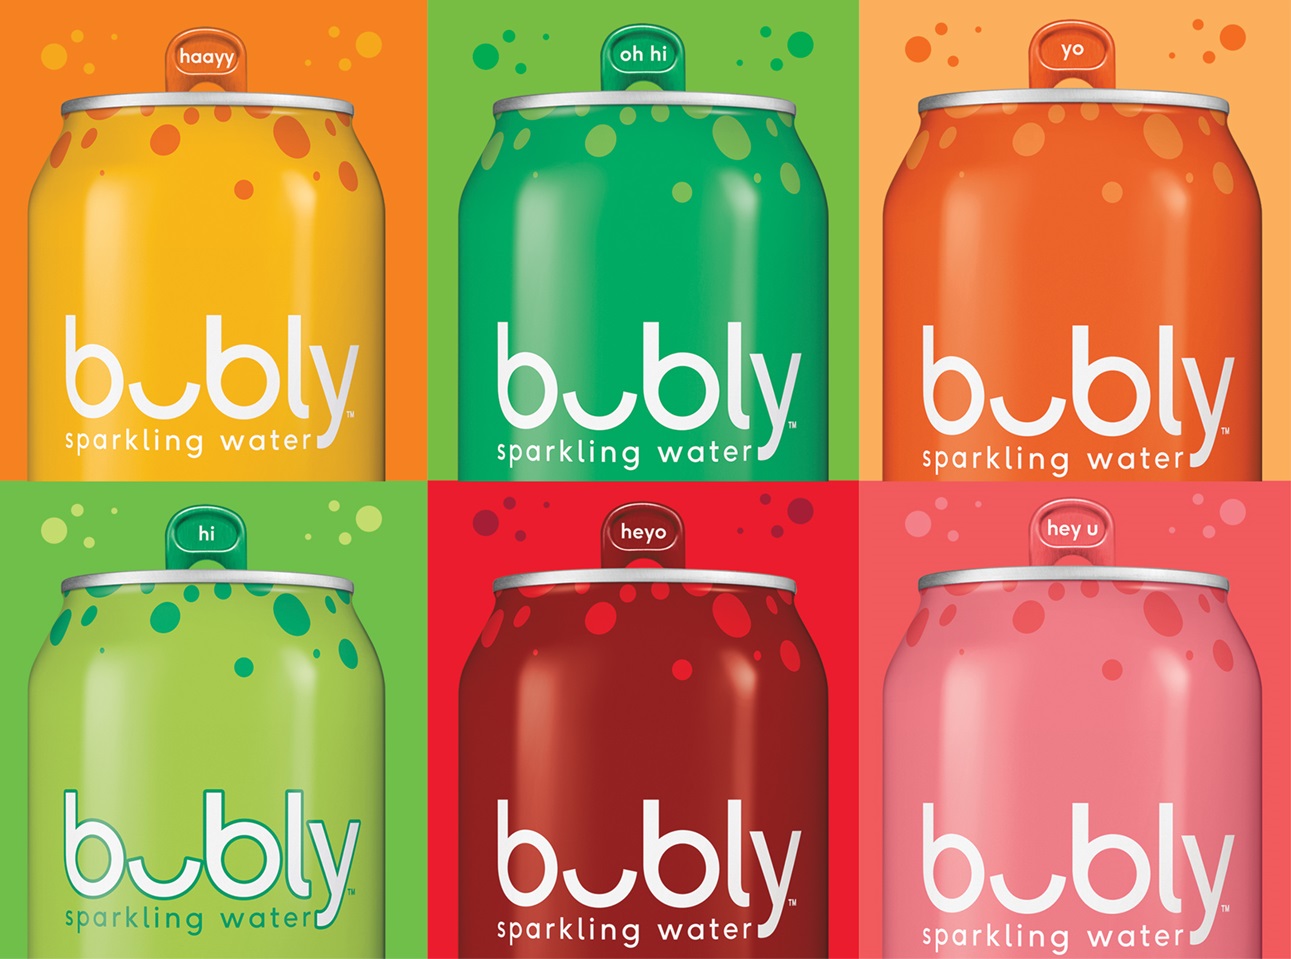 How Your Company Can Capitalize on the Carbonated Drink Bubble